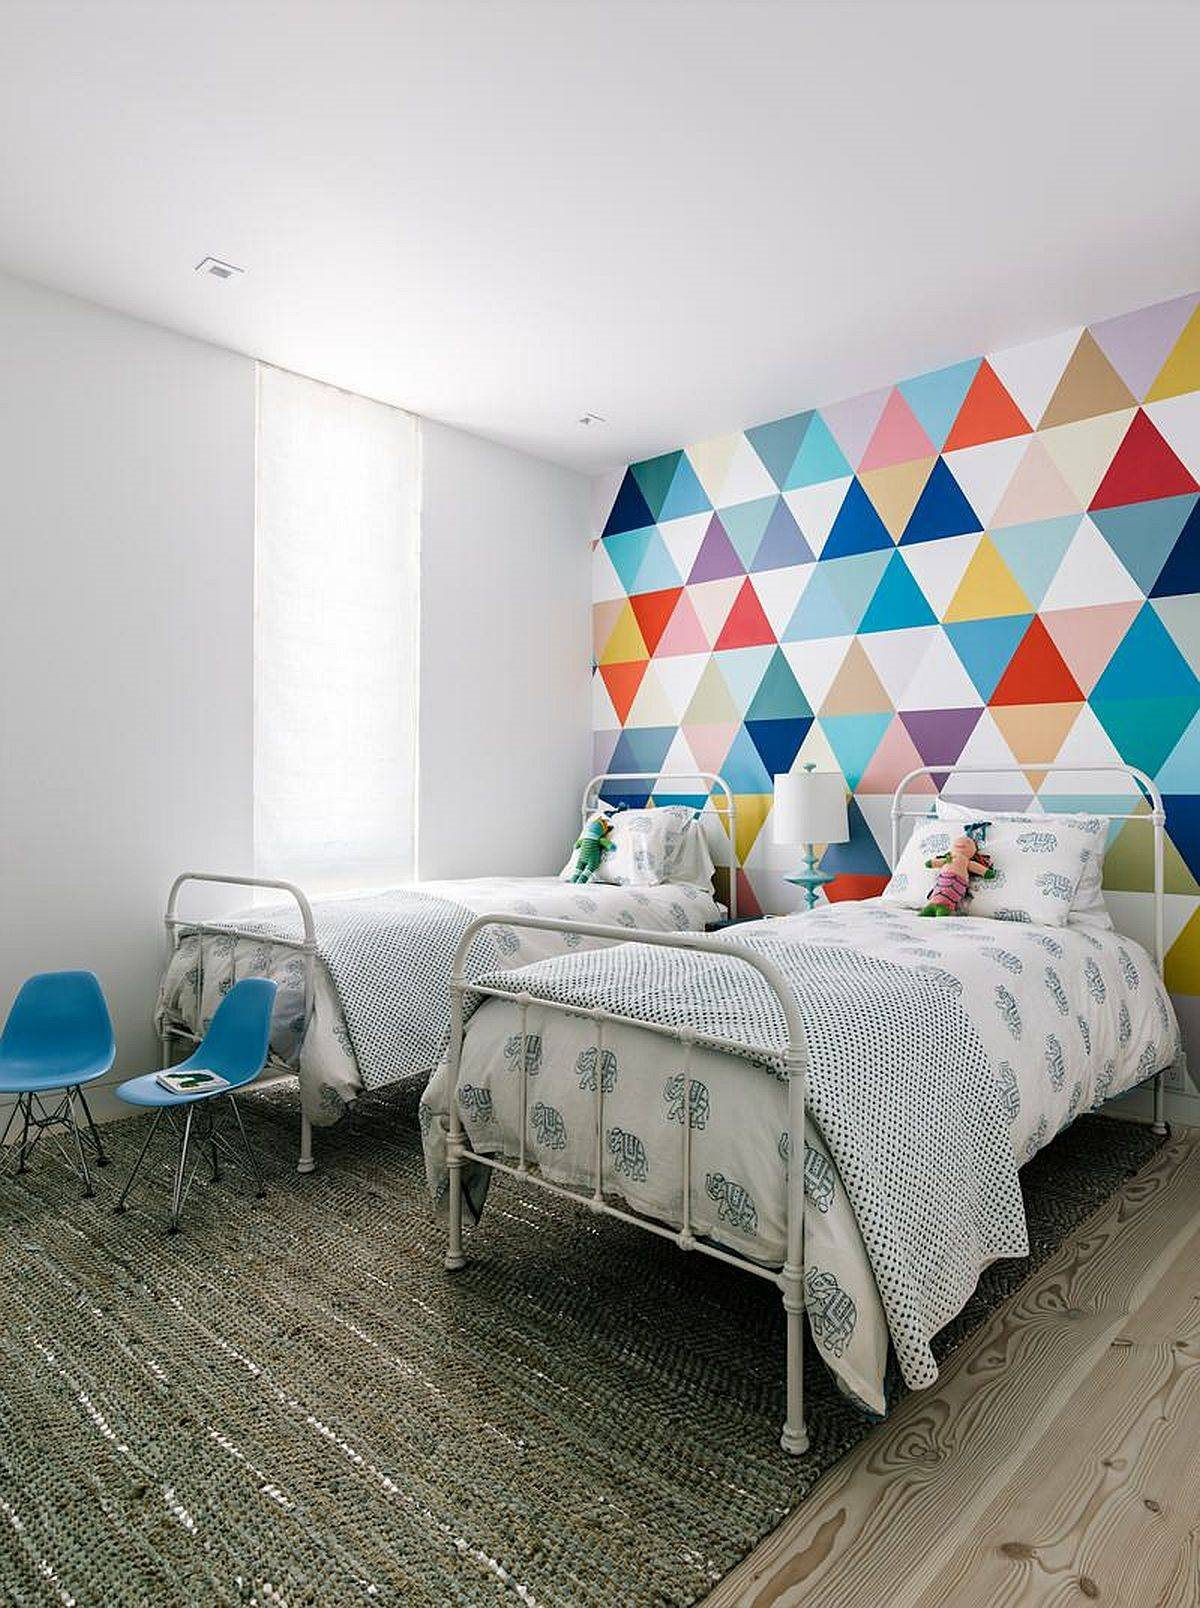 vivacious-multi-colored-geometric-accent-wall-for-the-teen-bedroom-15669.jpg